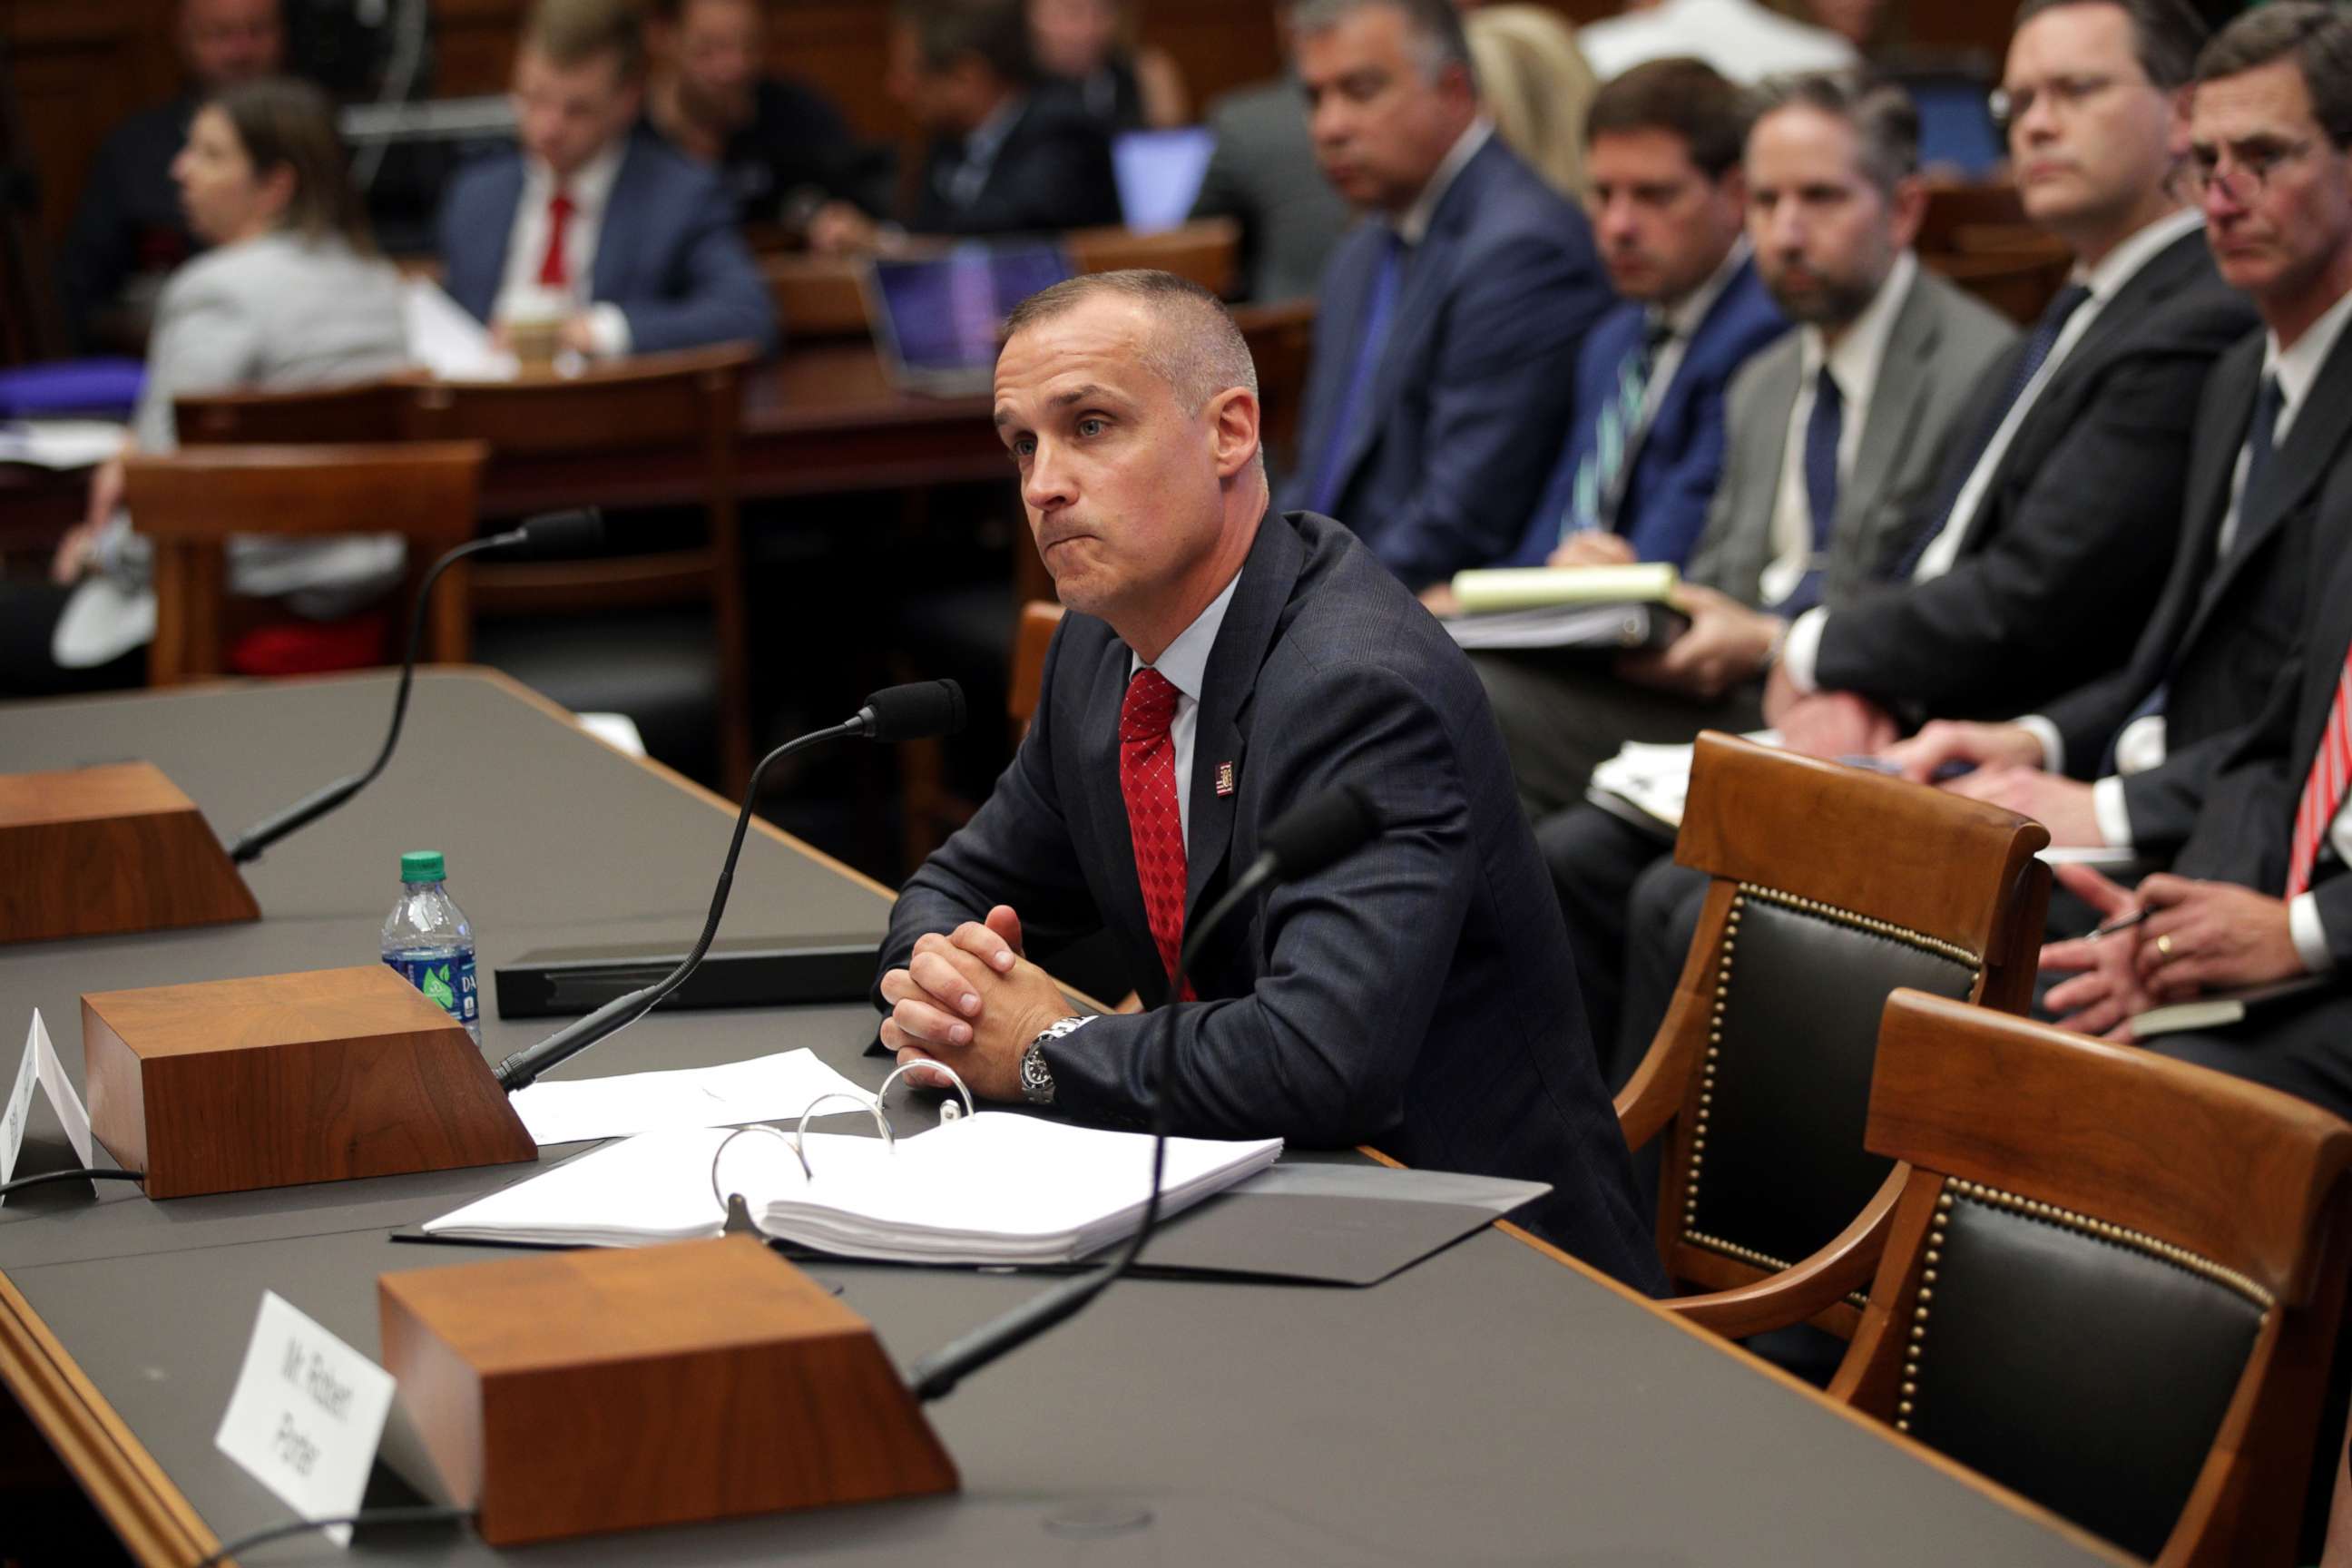 PHOTO: Former Trump campaign manager Corey Lewandowski testifies during a hearing before the House Judiciary Committee in the Rayburn House Office Building on Capitol Hill, Sept. 17, 2019, in Washington, DC.